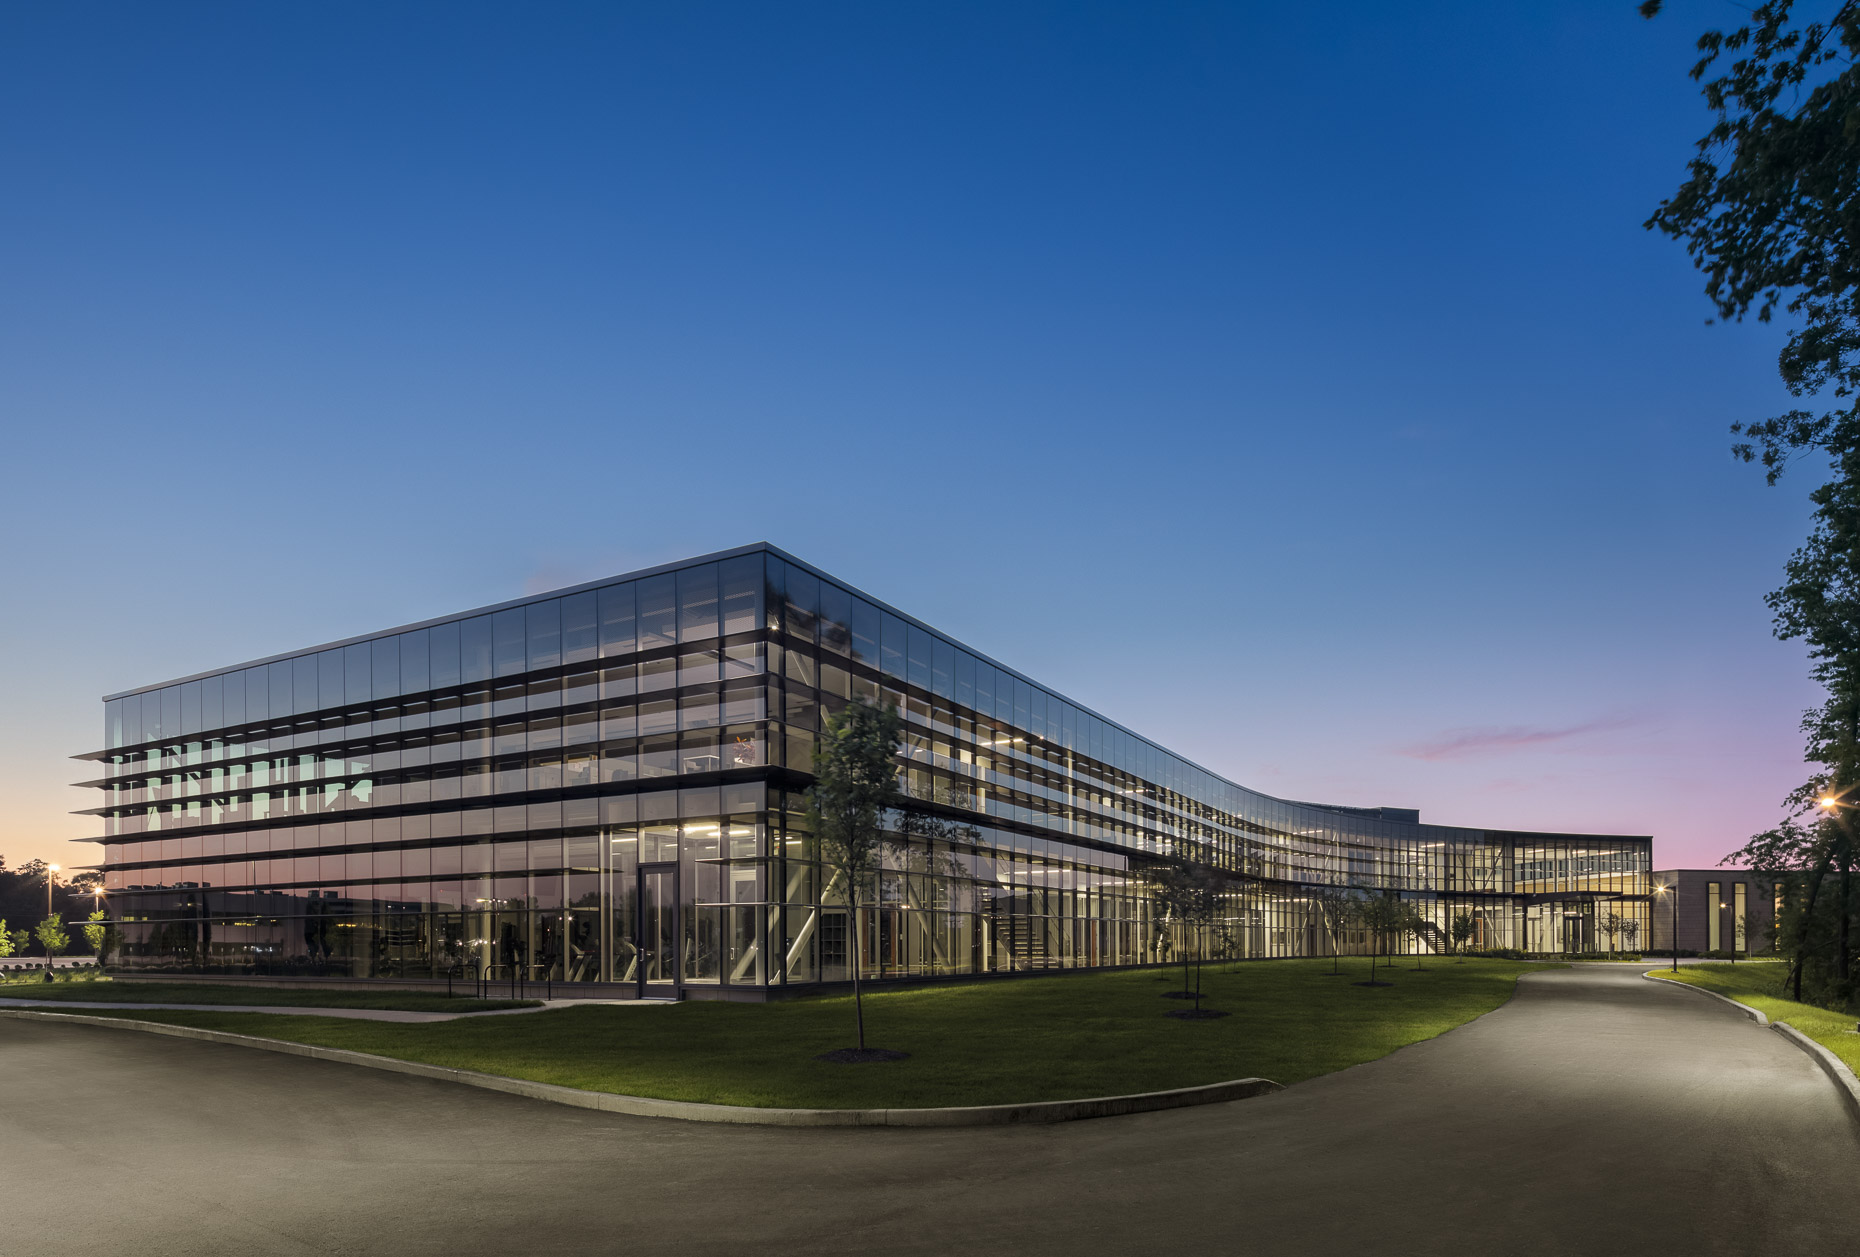 Wabash Valley Power Headquarters by Ratio Architects photographed by Brad Feinknopf based in Columbus, Ohio